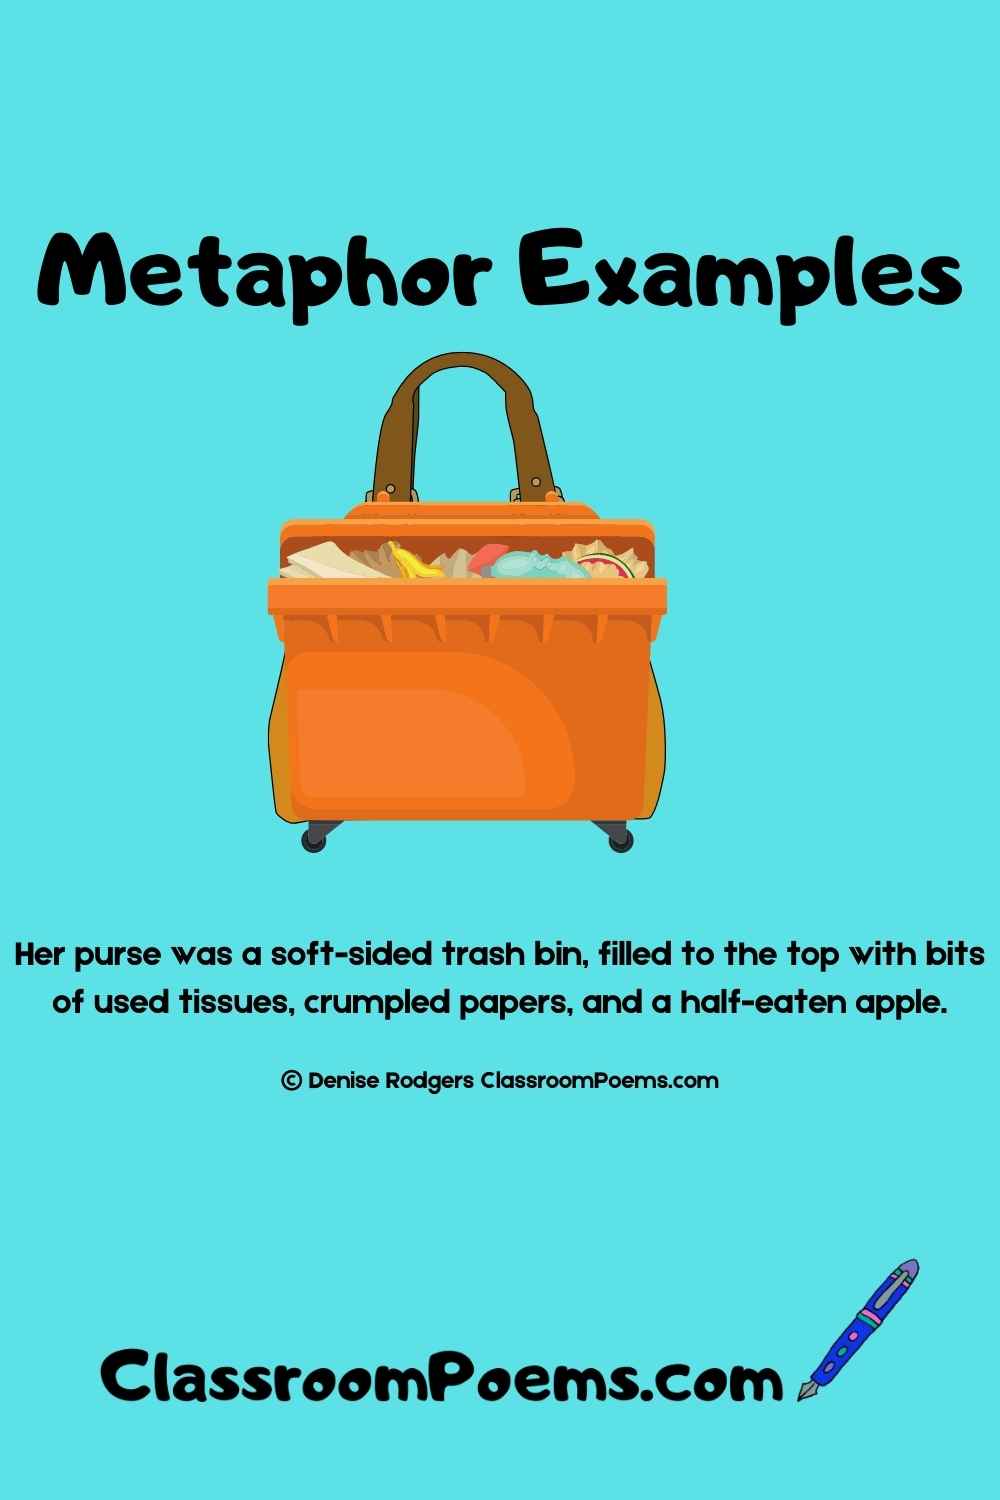 Trash bin metaphor example by Denise Rodgers on  ClassroomPoems.com.